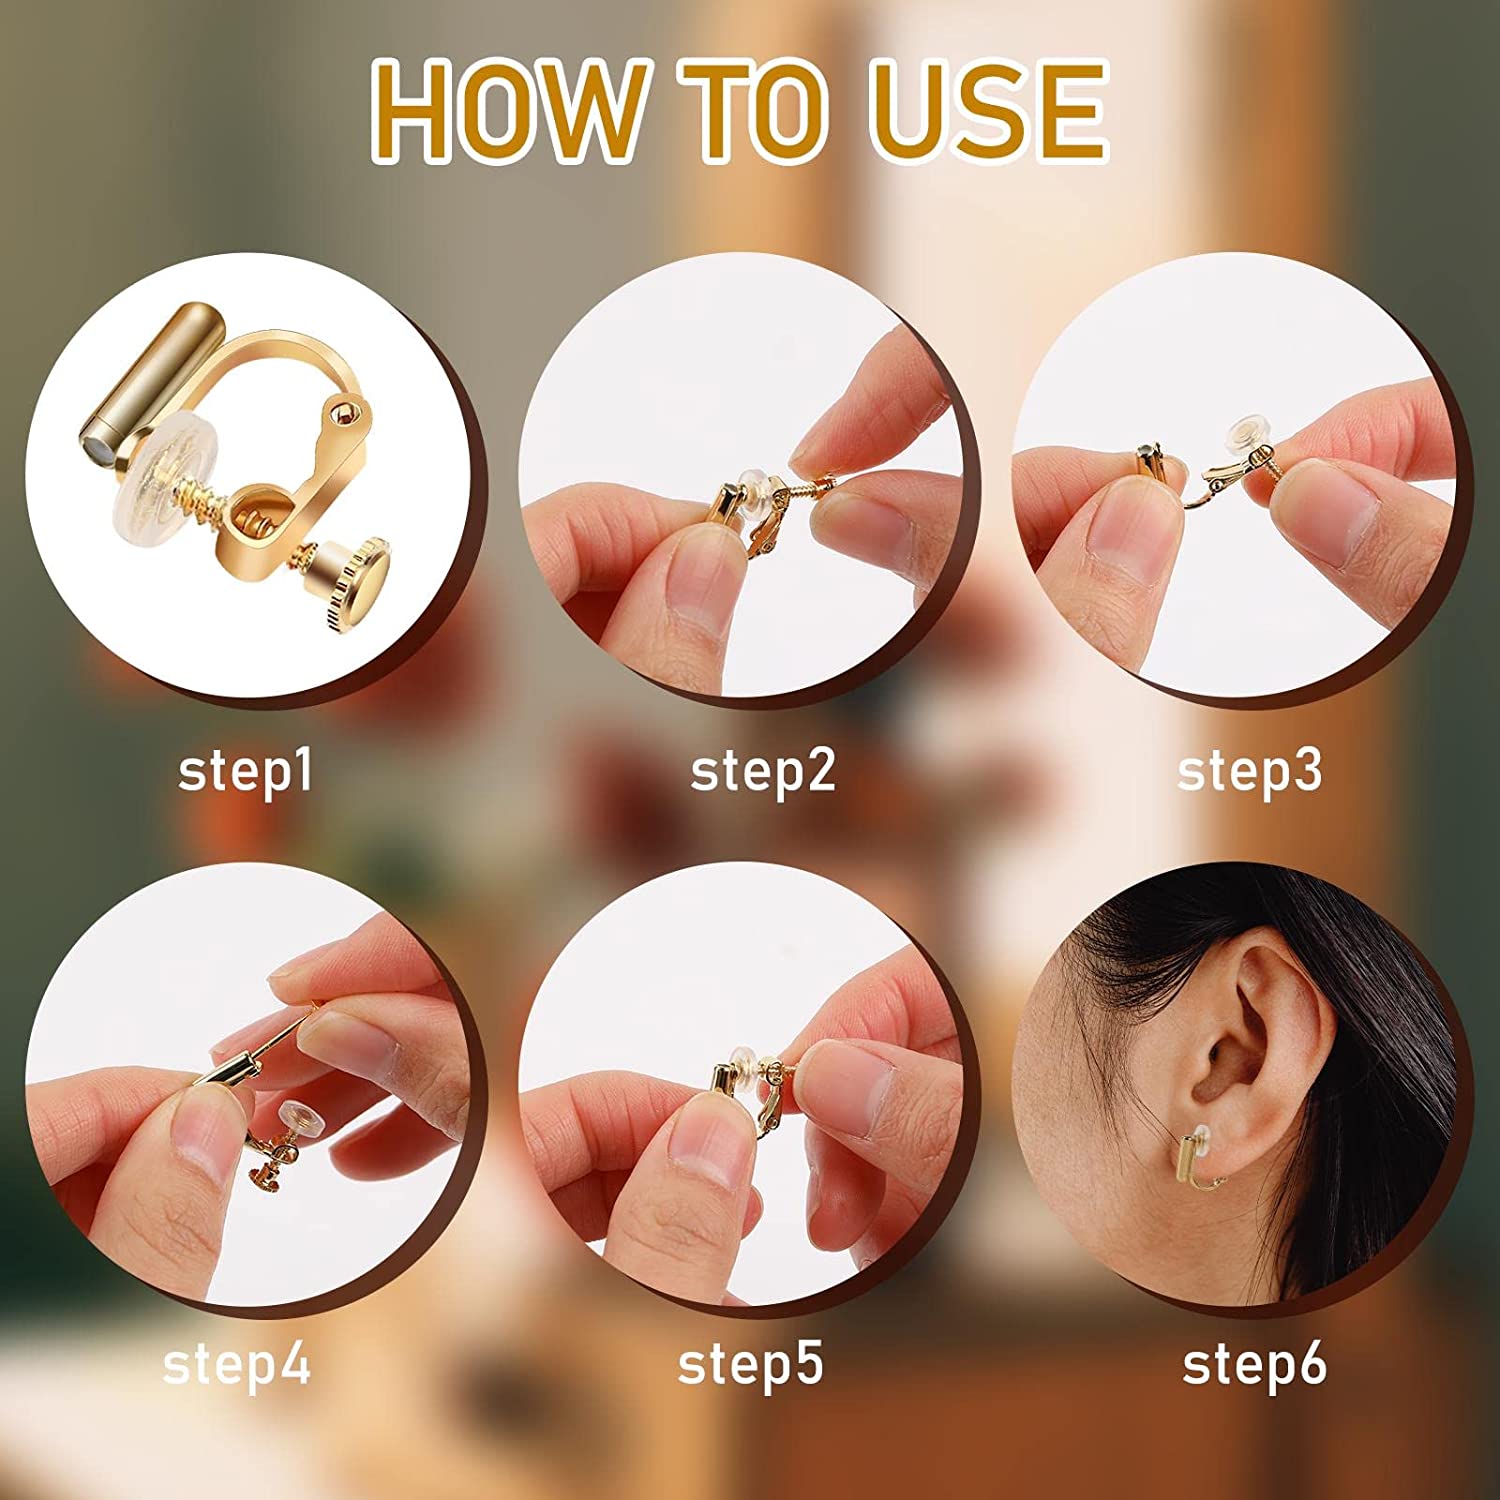 16 Pcs Clip on Earring Converter with Silicon Earring Pads, Gold Silver Round Flat Back Tray Earring Clip, and Converter Components with Post for DIY Earring Making for Women Men None Pierced Ears - image 4 of 5